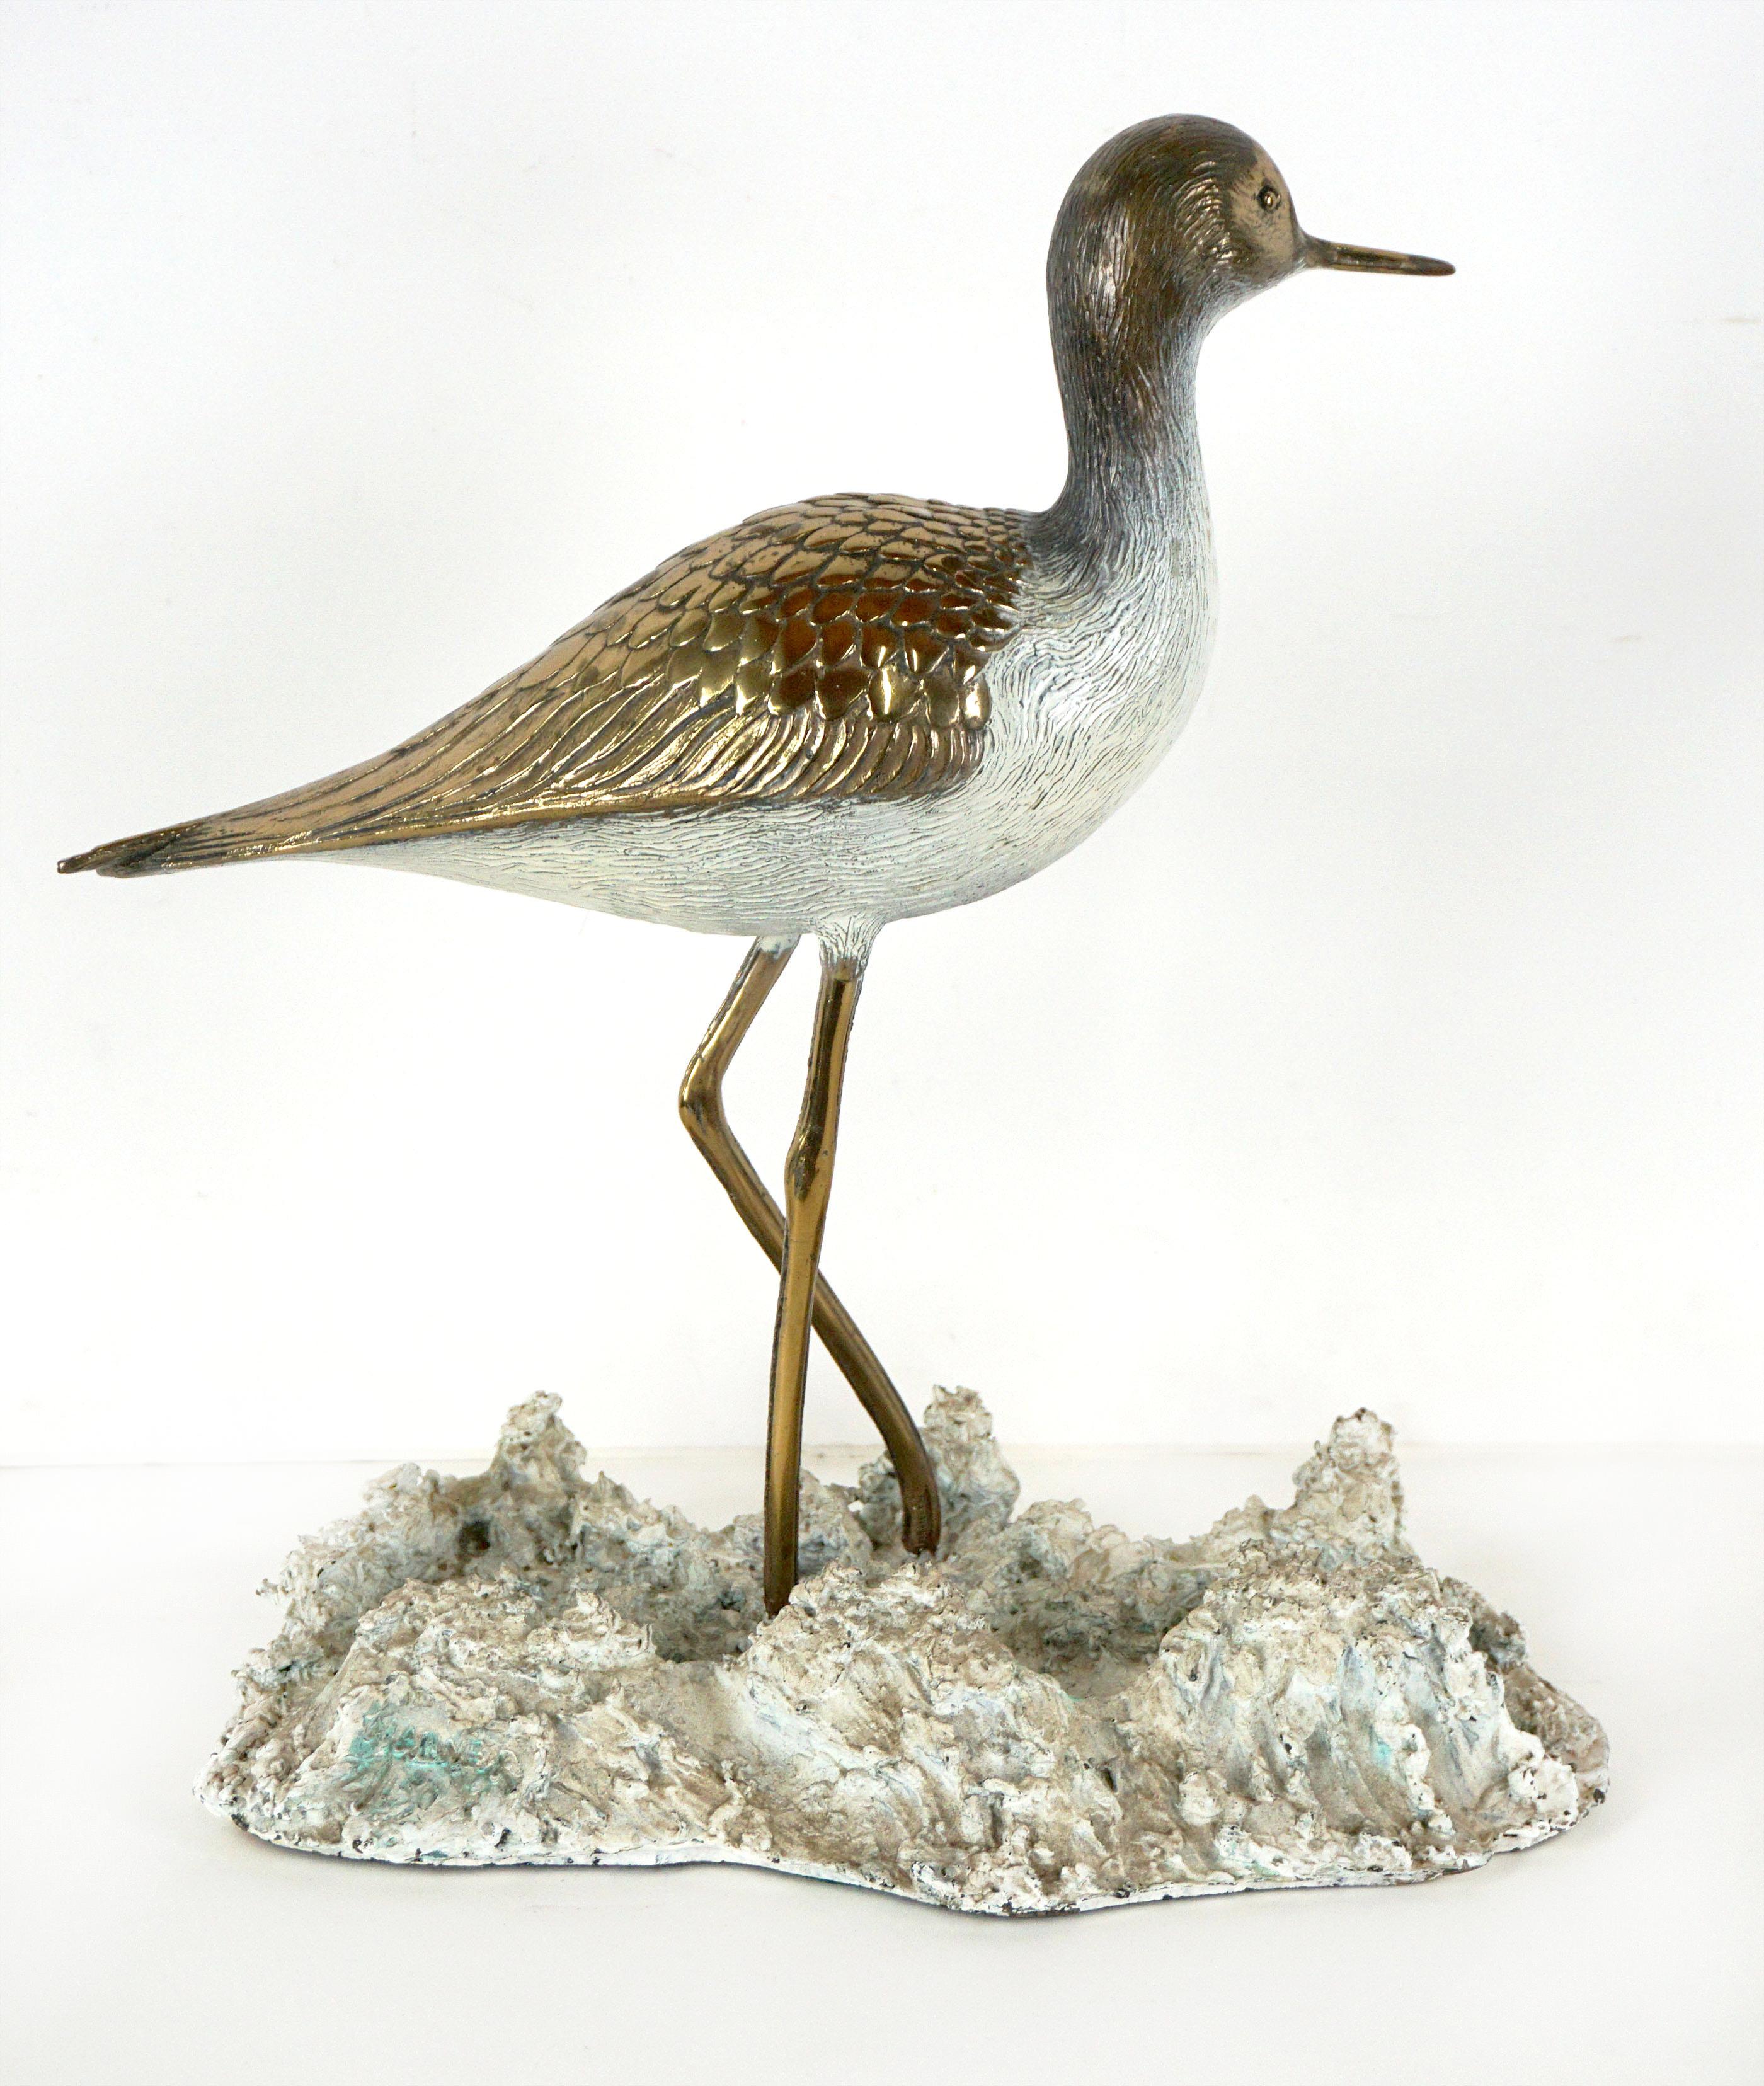 Modern Bronze and Ceramic Sculpture of Silt Sandpiper in Waves.

Beautiful bronze sculpture of iconic Californian Silt Sandpiper in the waves by Doris Ann Warner (American, 1925-2010), circa 1970. This piece is beautifully executed bronze bird on